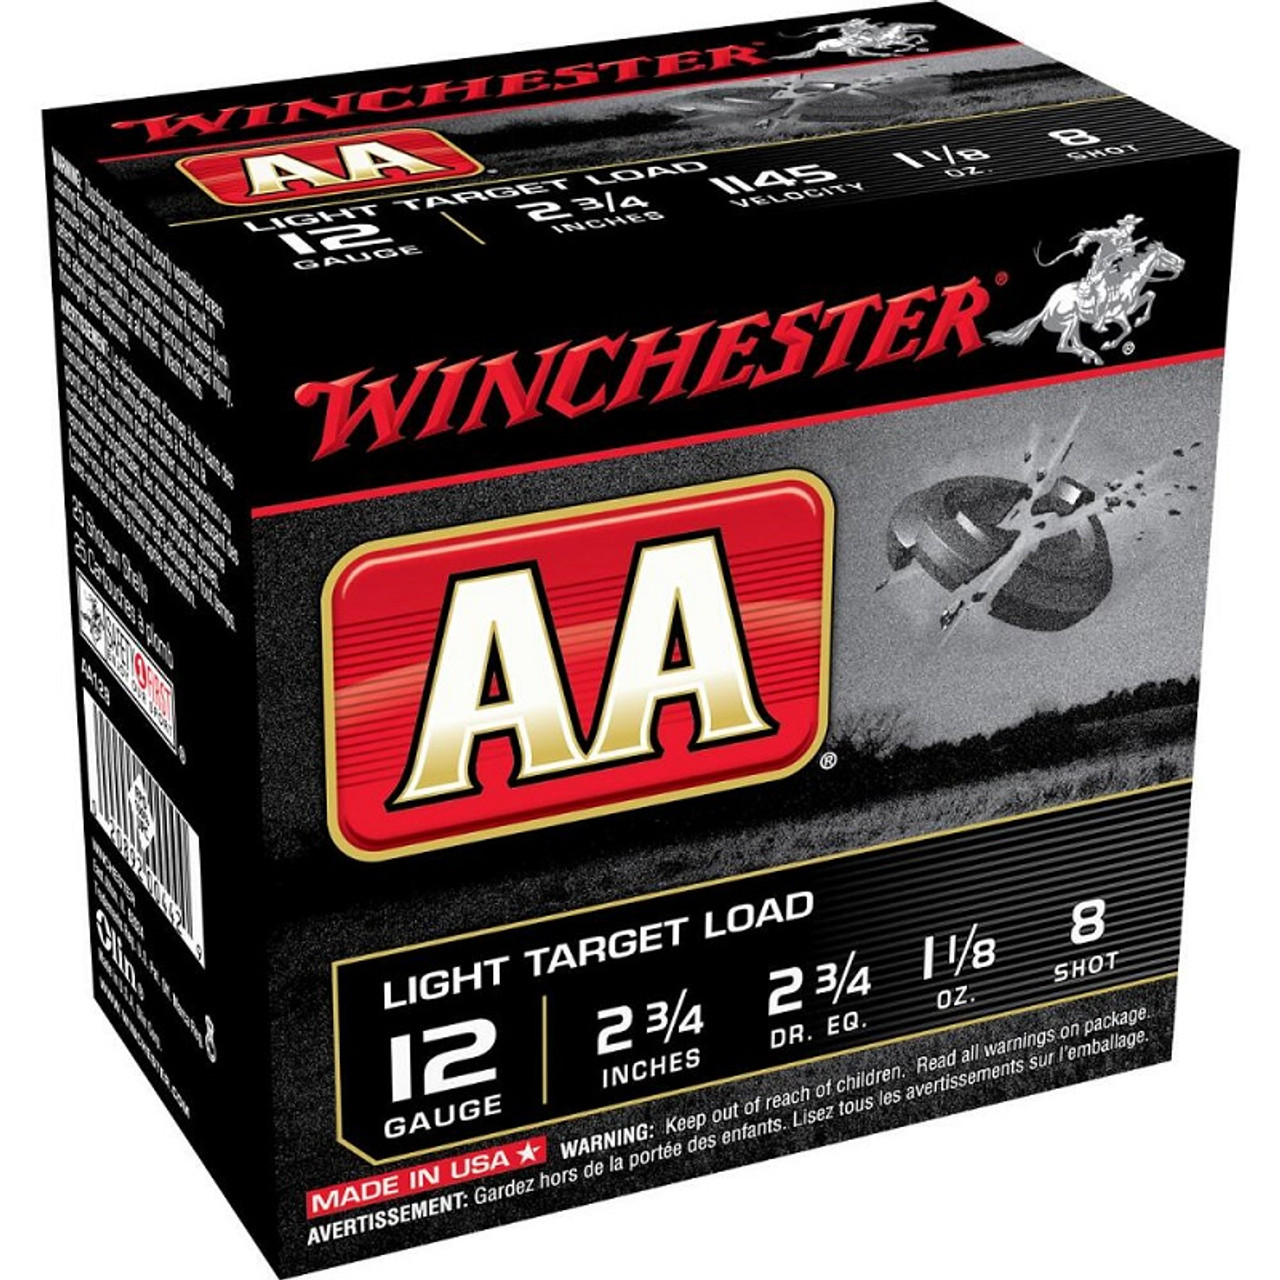 Winchester AA Target 12 Ga 2 3/4", 1 1/8 Oz #8 Lead Case of 250 Rds